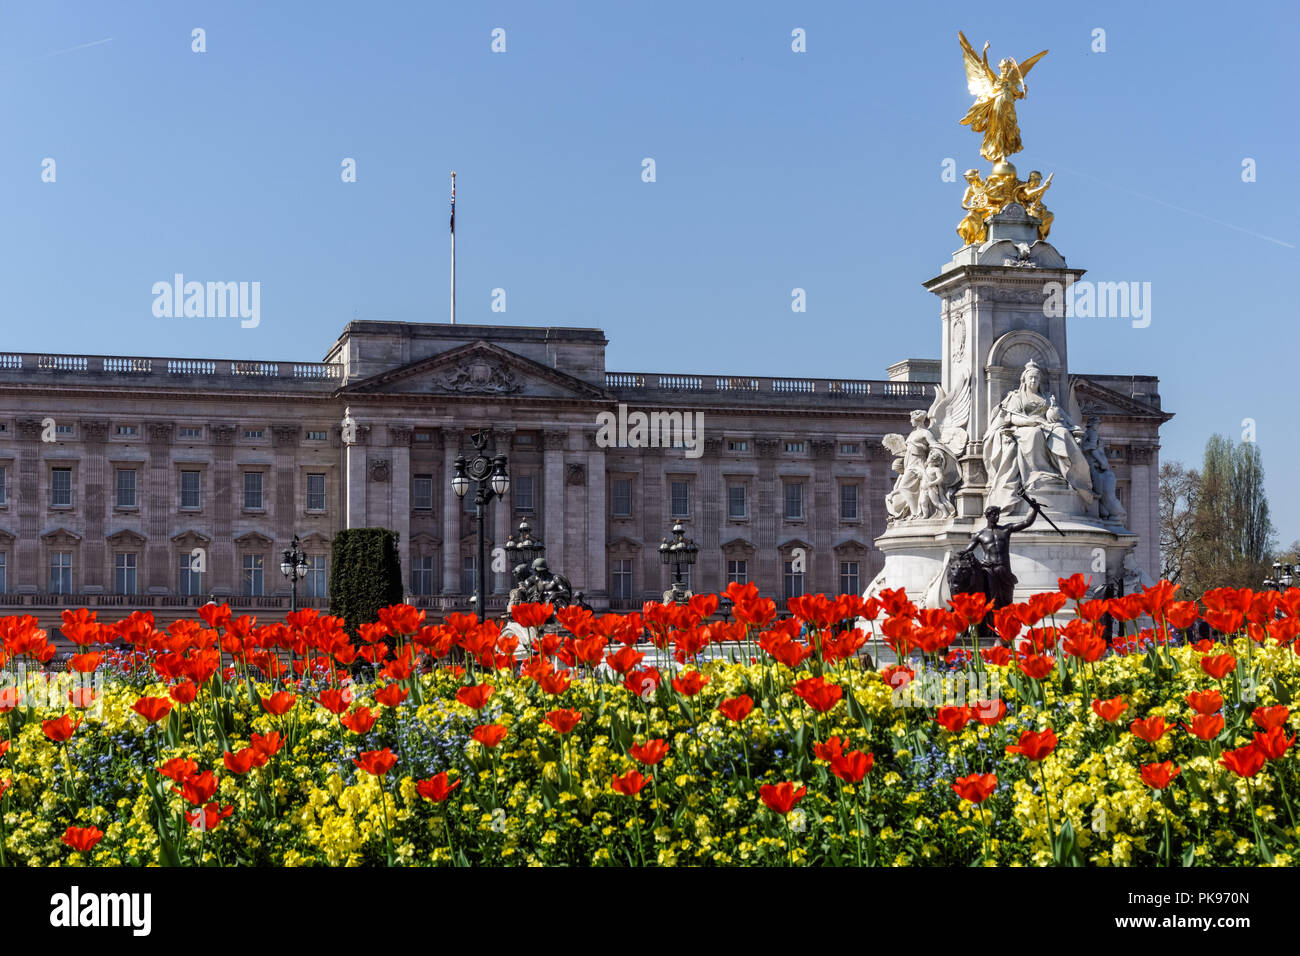 The Buckingham Palace with Victoria Memorial in London, England United Kingdom UK Stock Photo